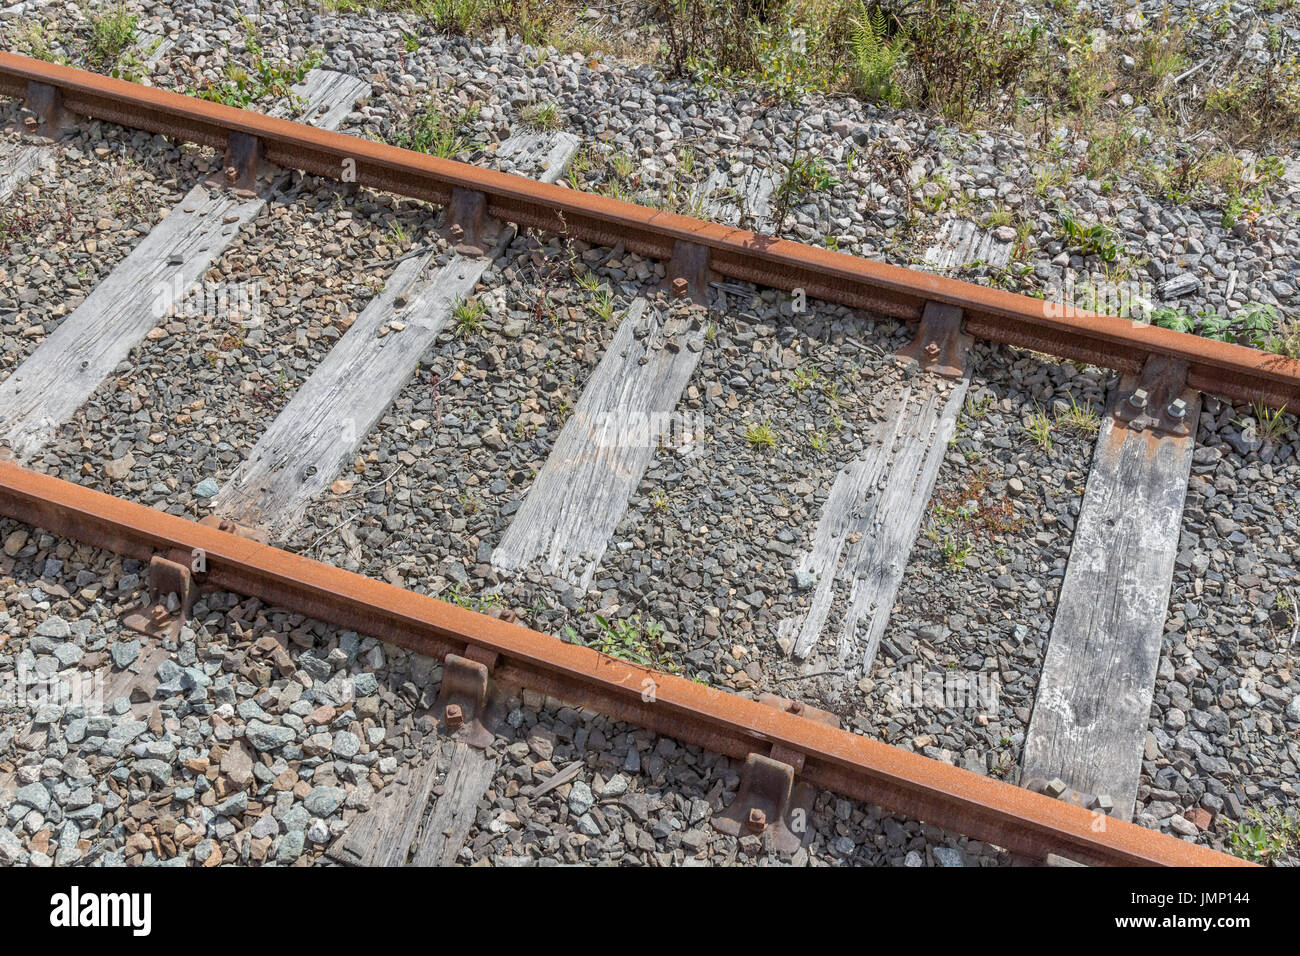 Small section of railway / railroad track - metaphor for 'end of the line', rail transport, and general concept of freight. Stock Photo